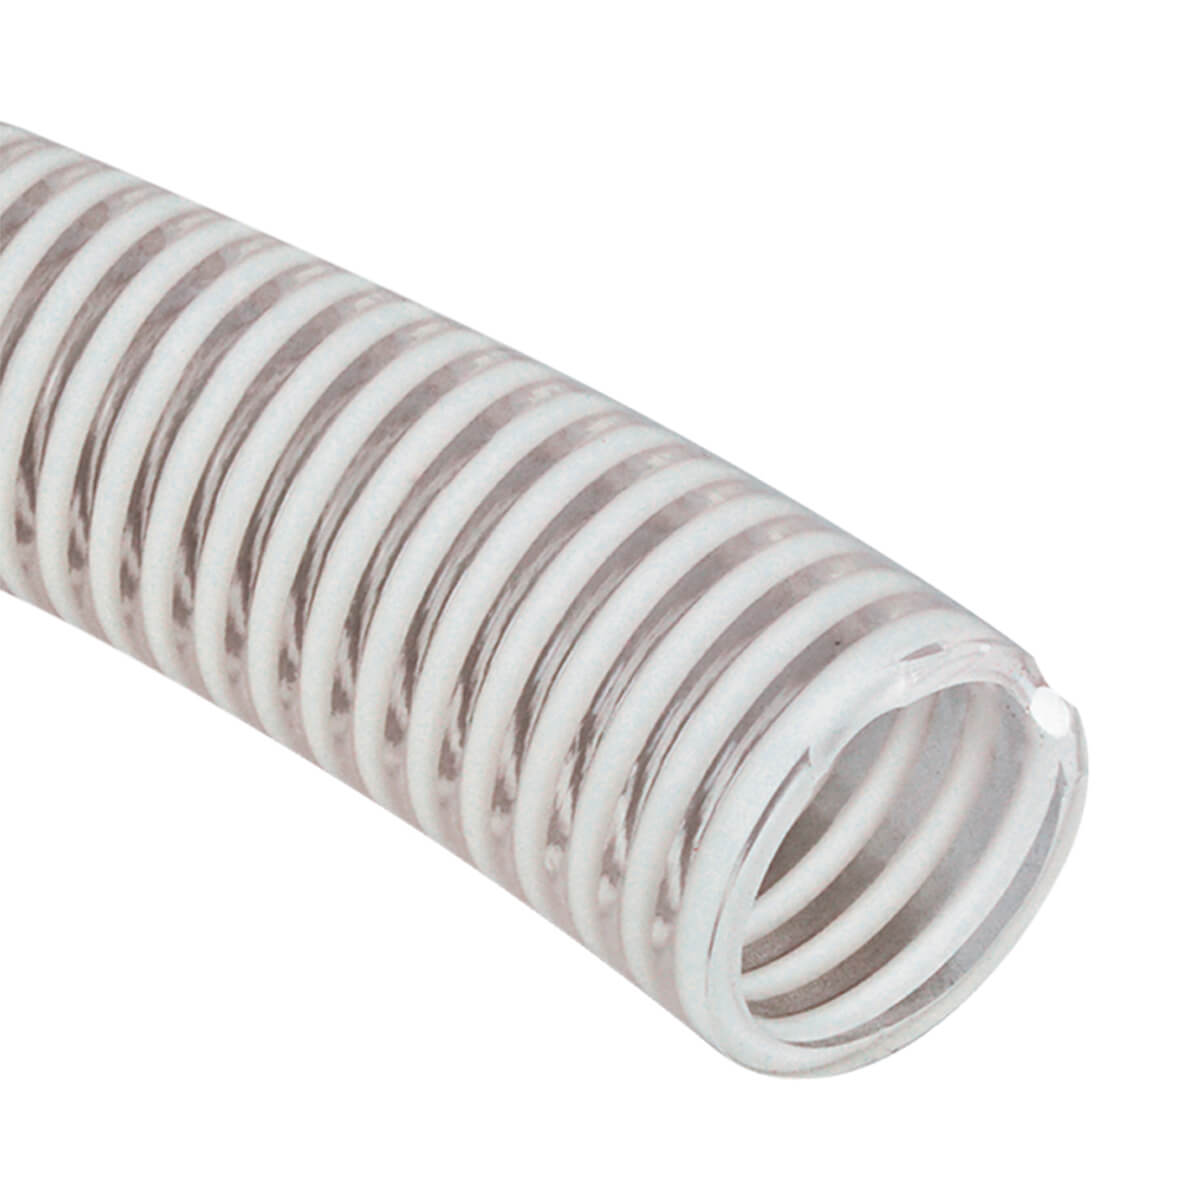 Clear PVC Suction Hose — Bulk/Uncoupled - 2-1/2-in - Price Per Ft